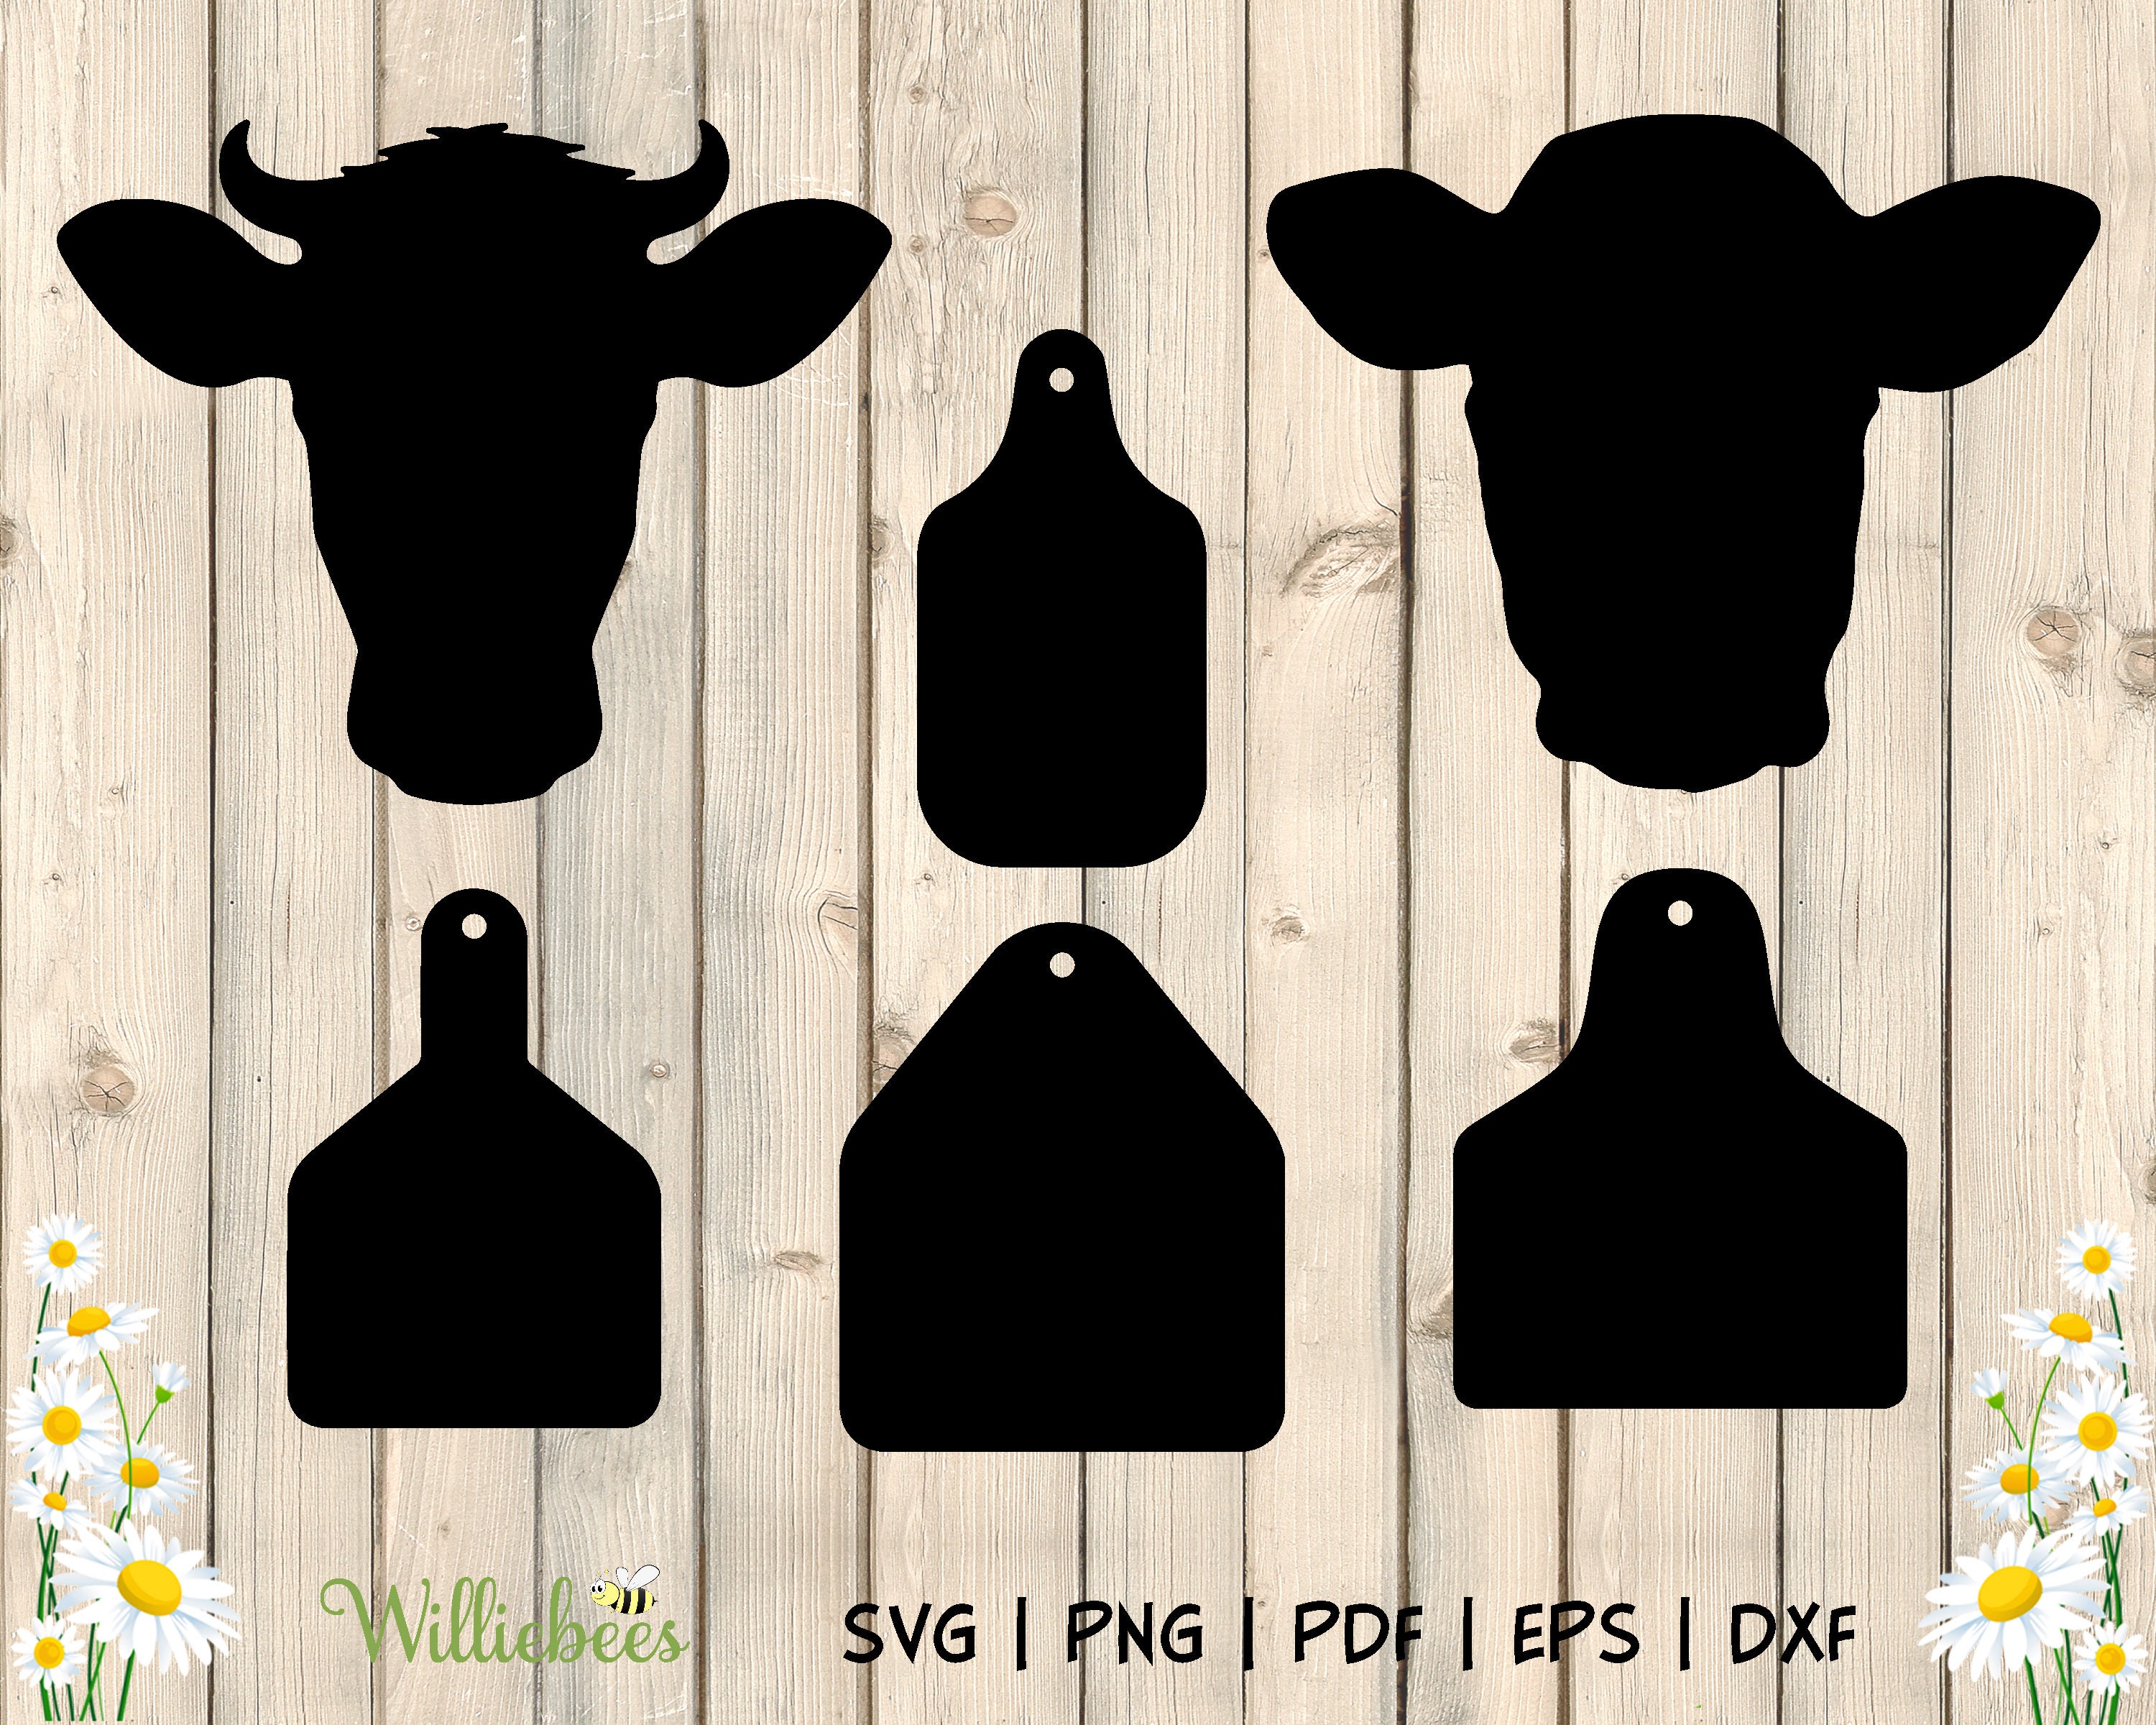 Leather Cow Tag Blanks – Alden Leather Supply LLC